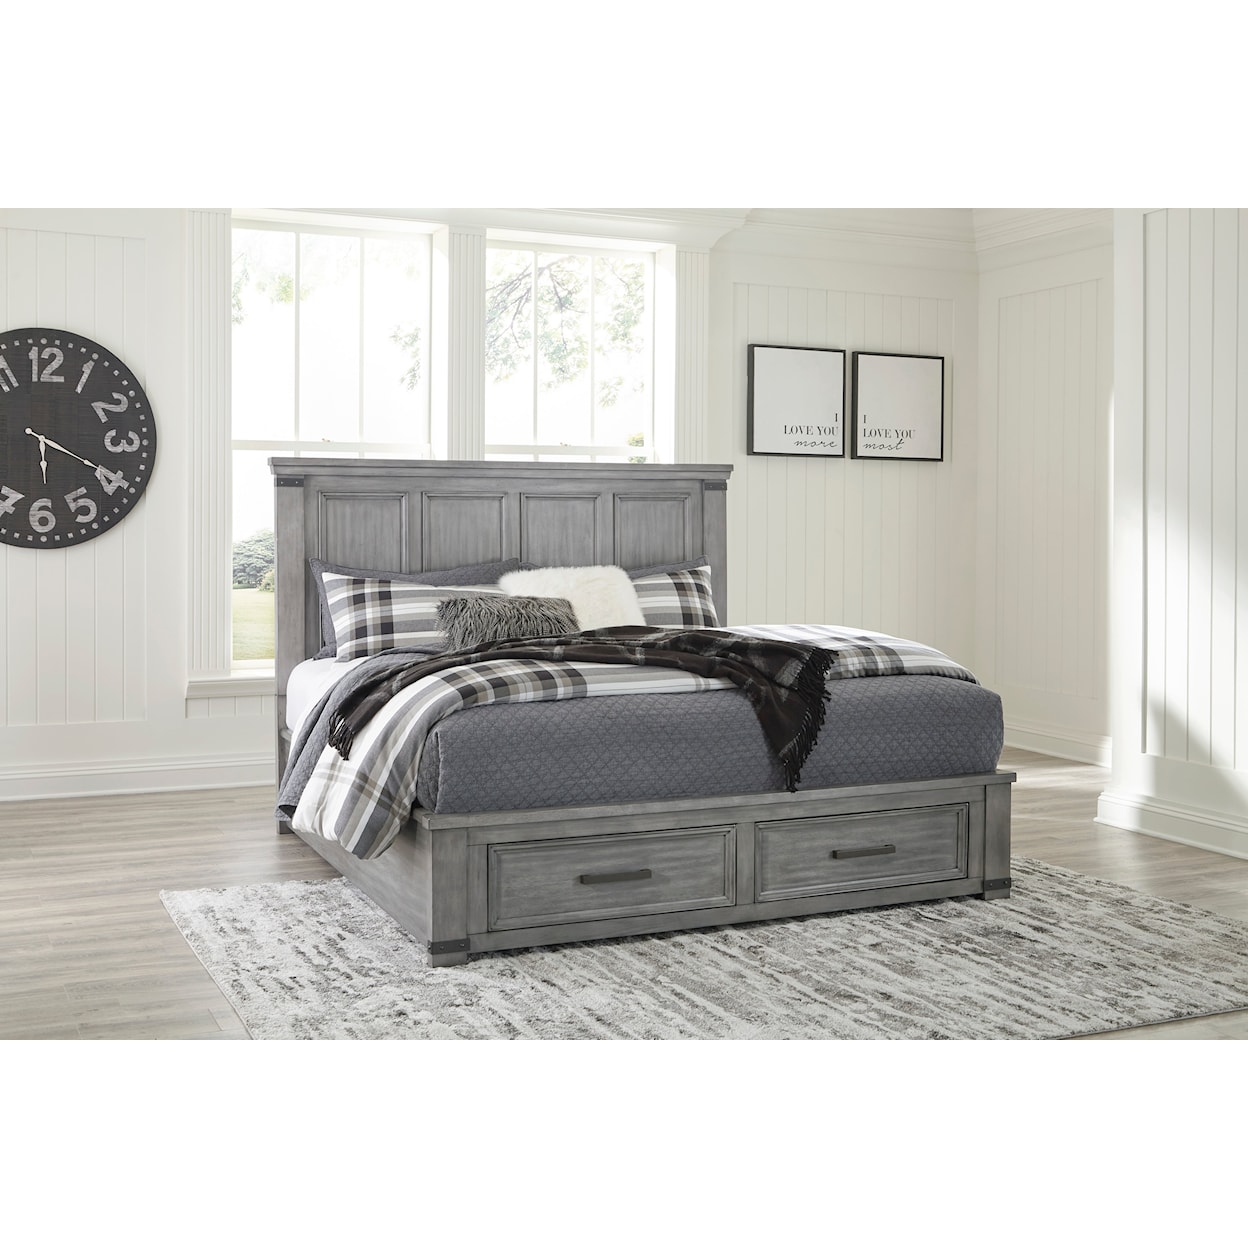 Benchcraft Russelyn California King Storage Bed